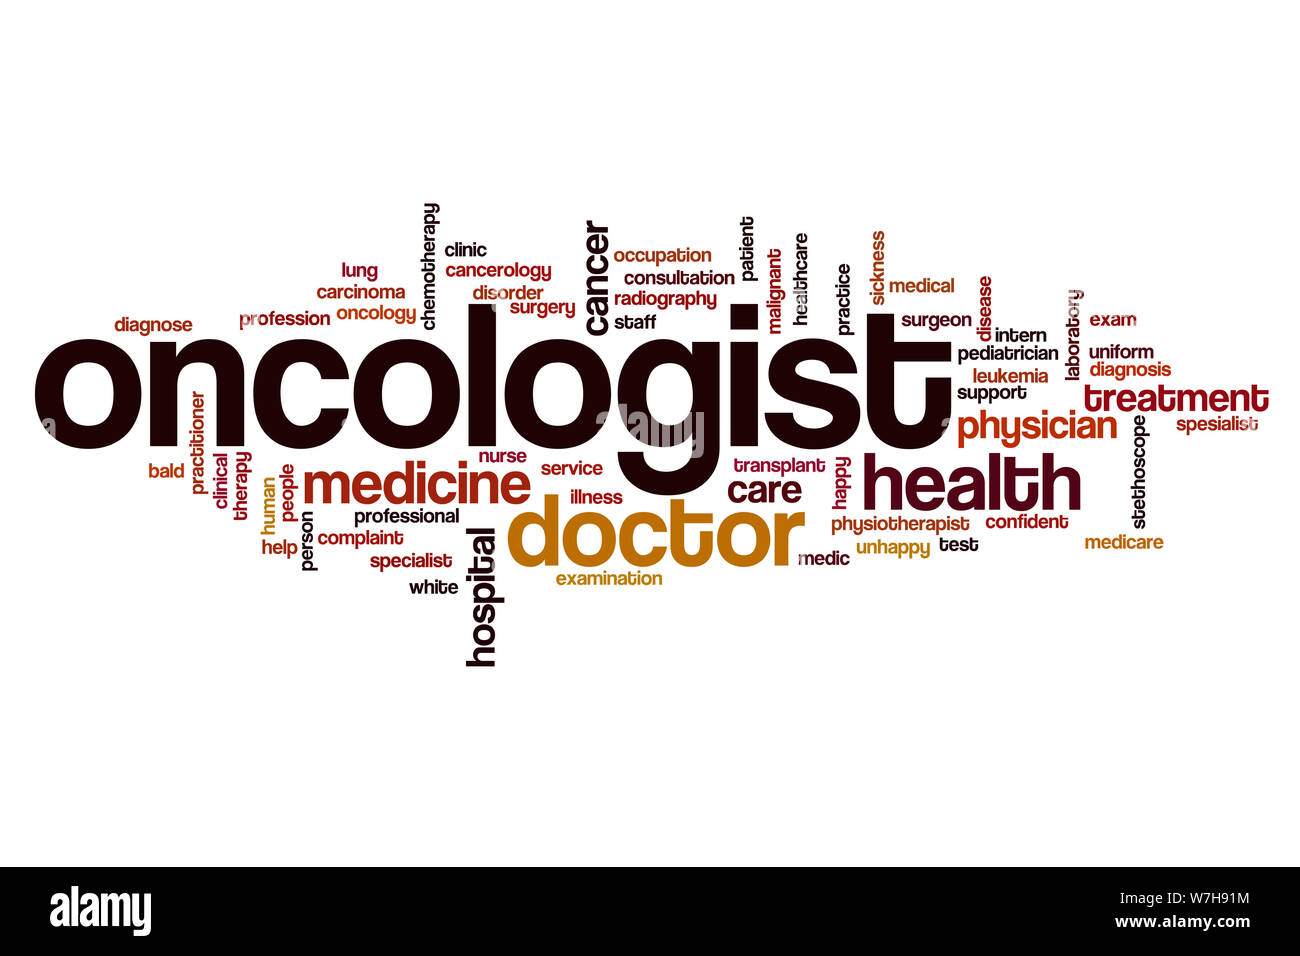 Oncologist word cloud concept Stock Photo